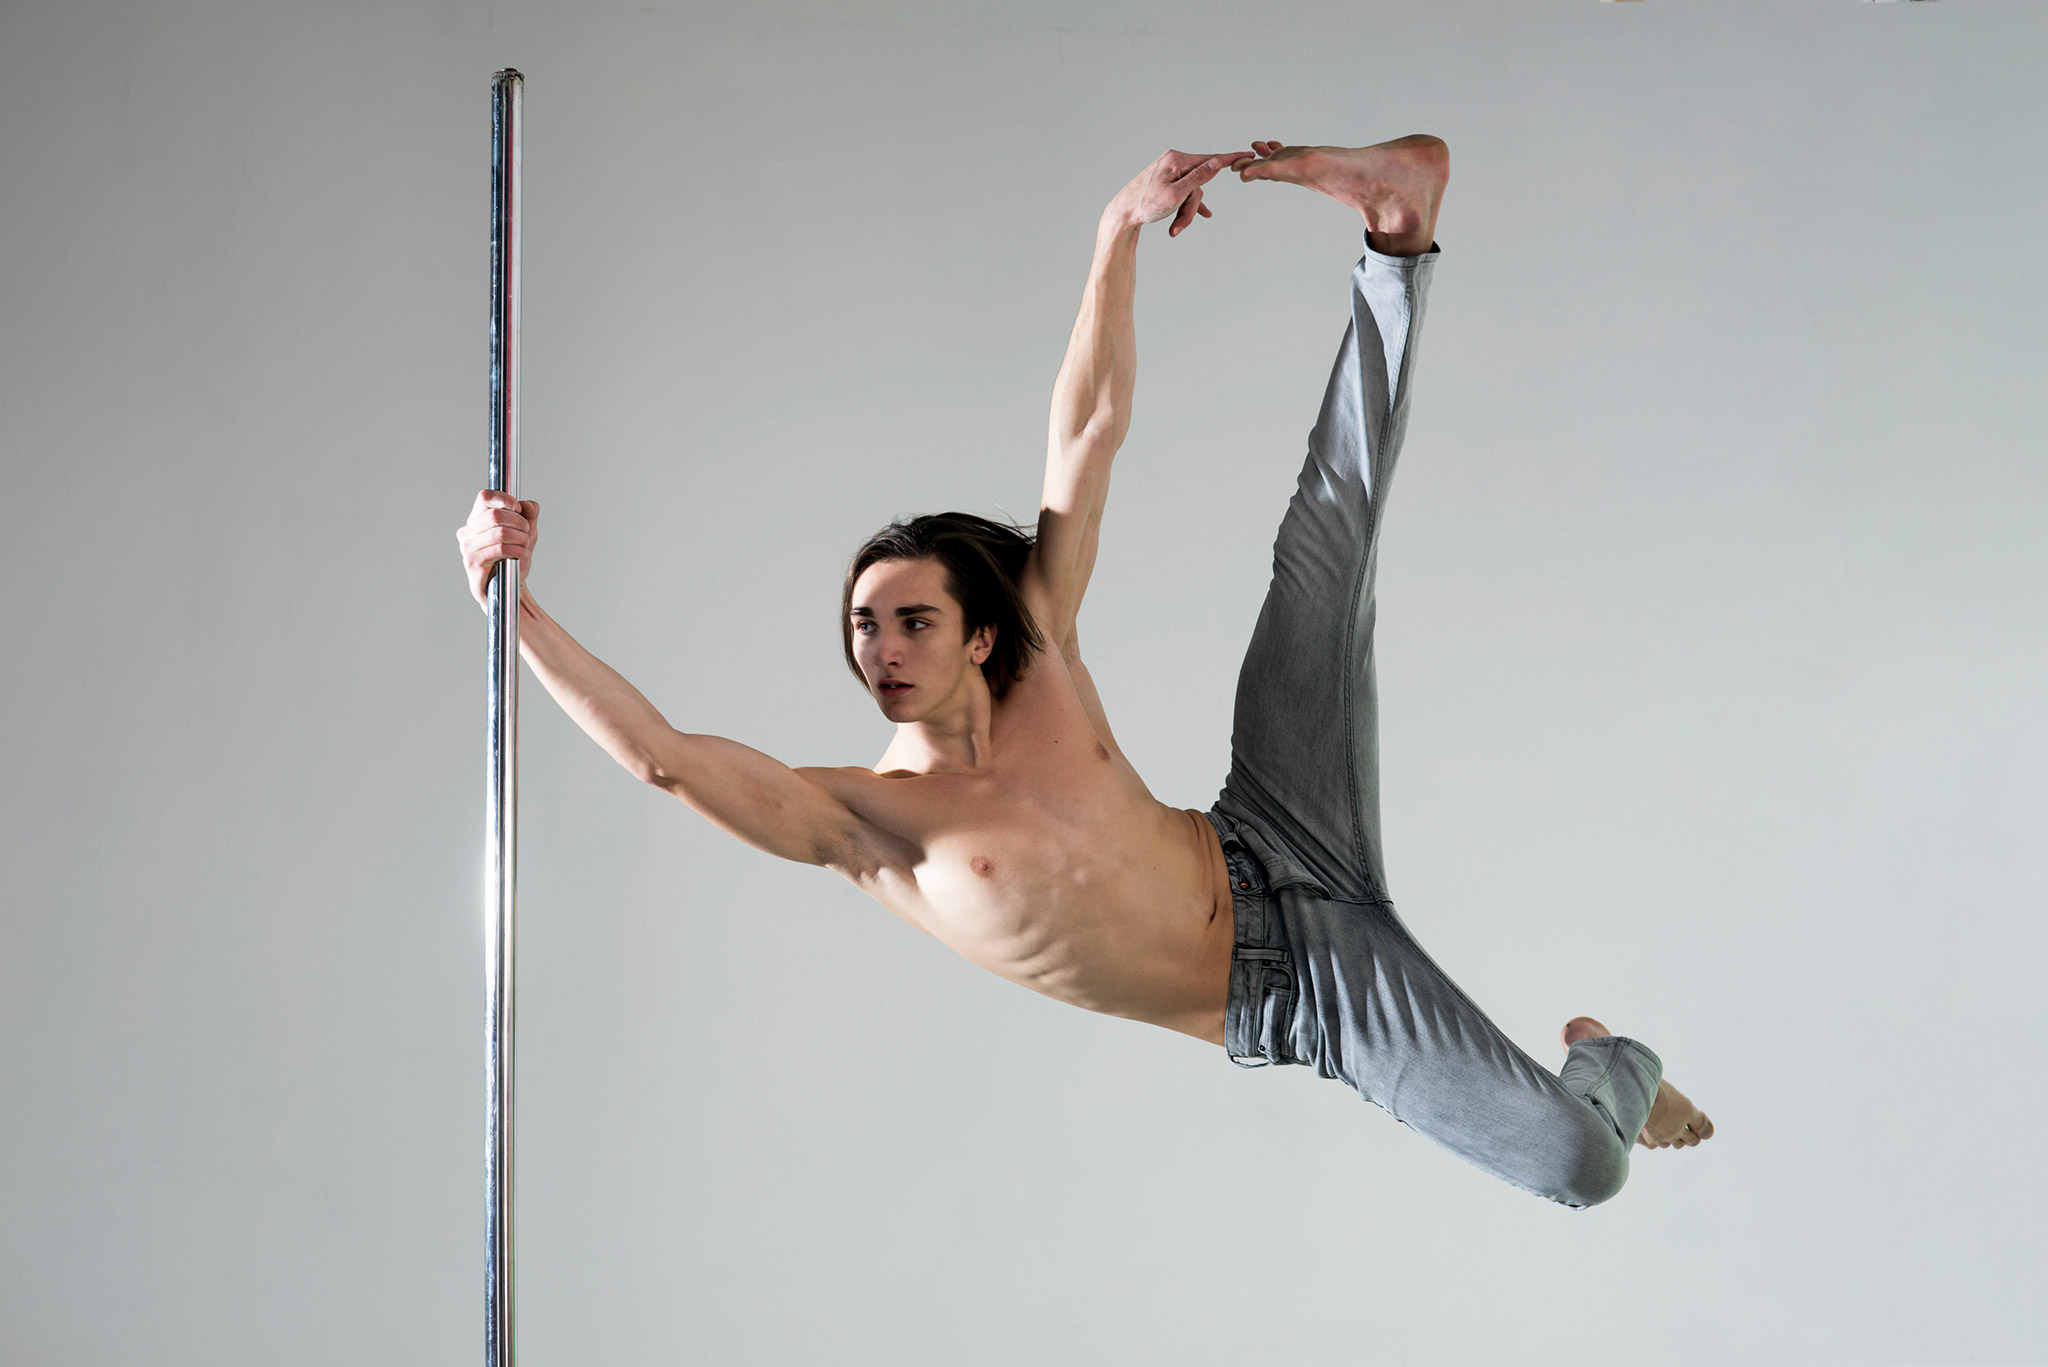 Spinning Pole online course